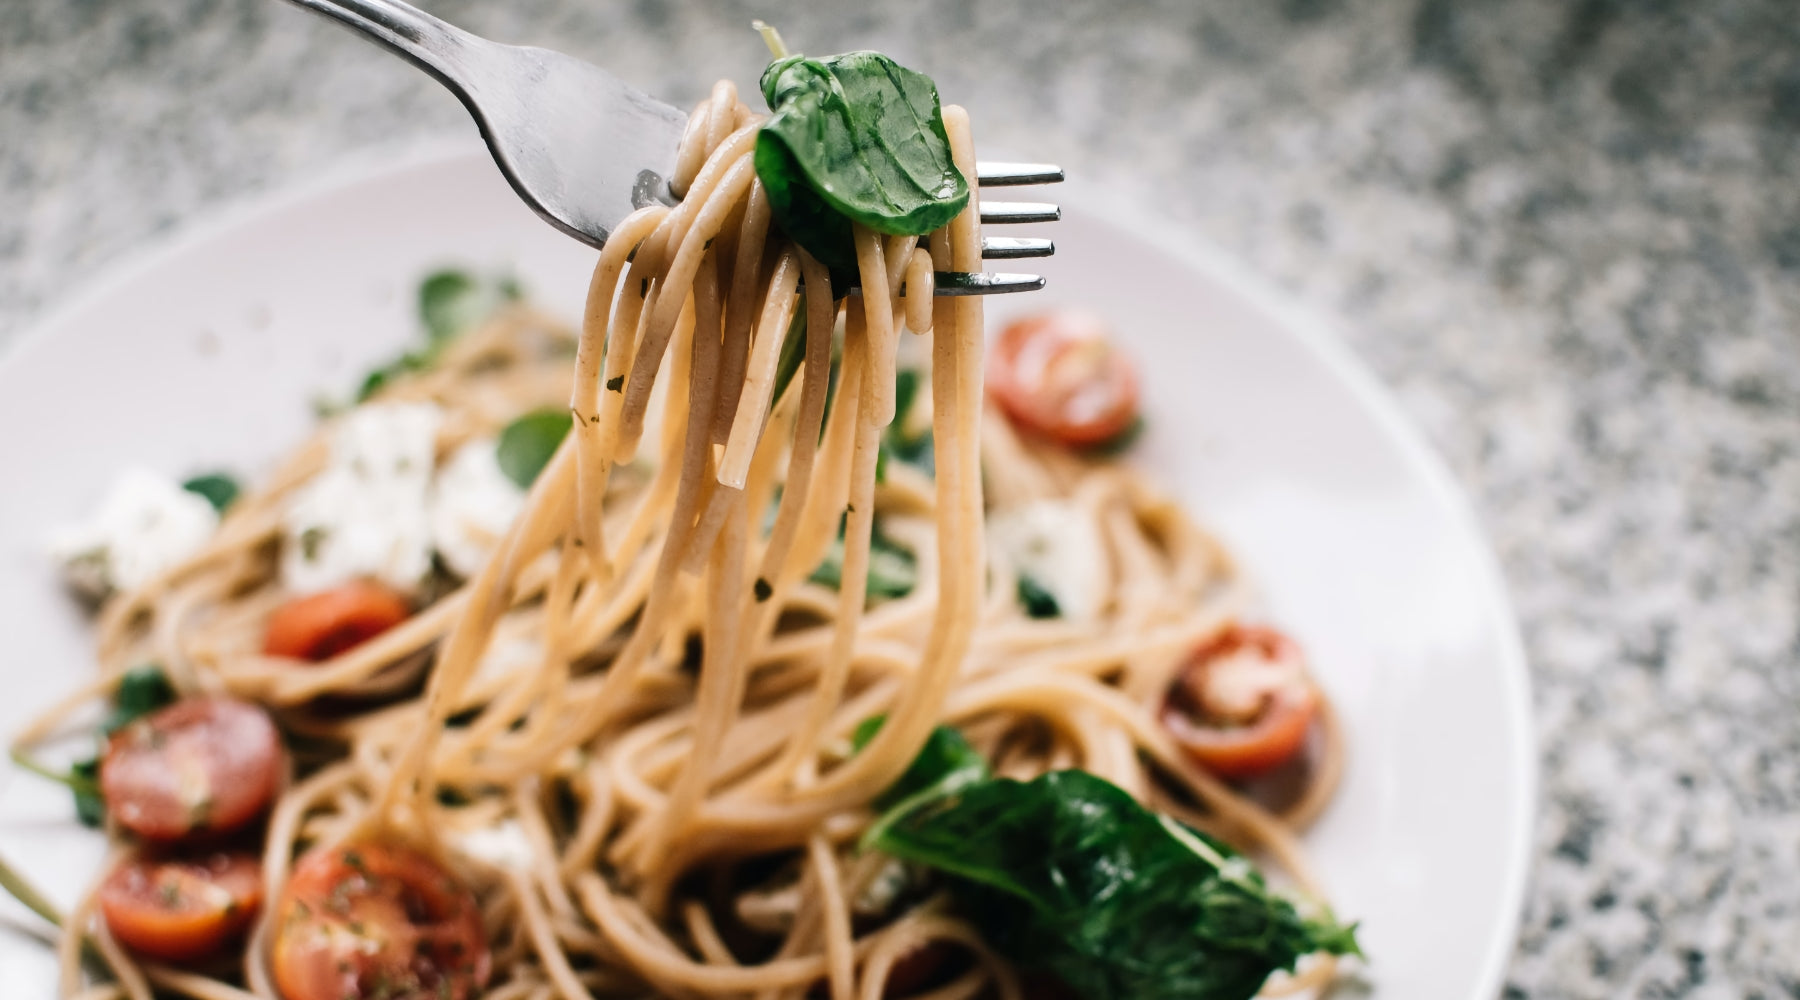 Is Pasta Healthy? Here’s What You Should Know